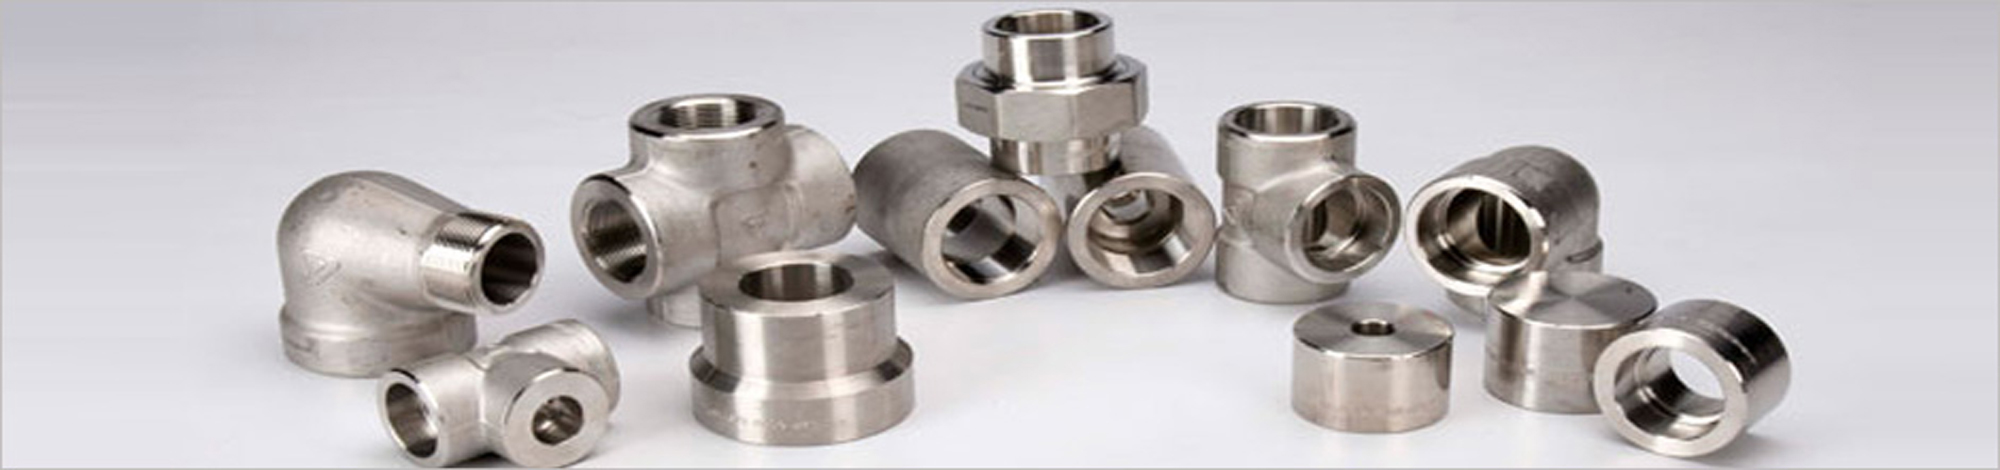 Monel 400 Outlet Fittings supplier